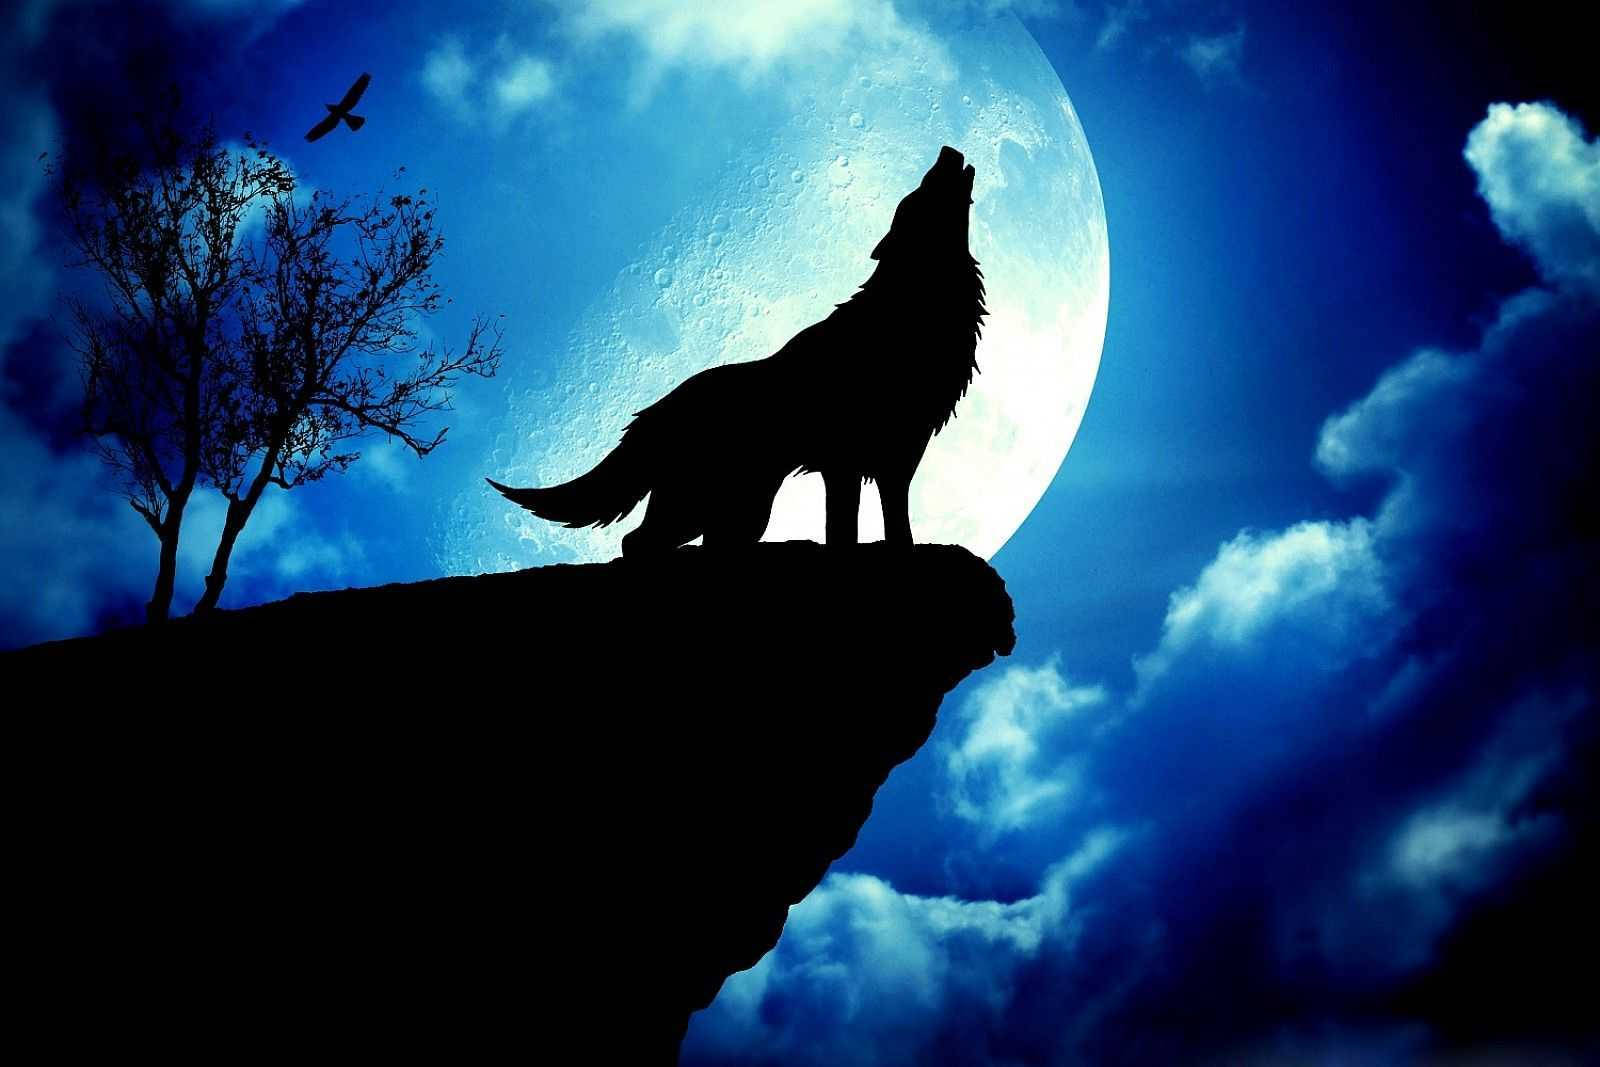 Cool Blue Wolf Wallpapers